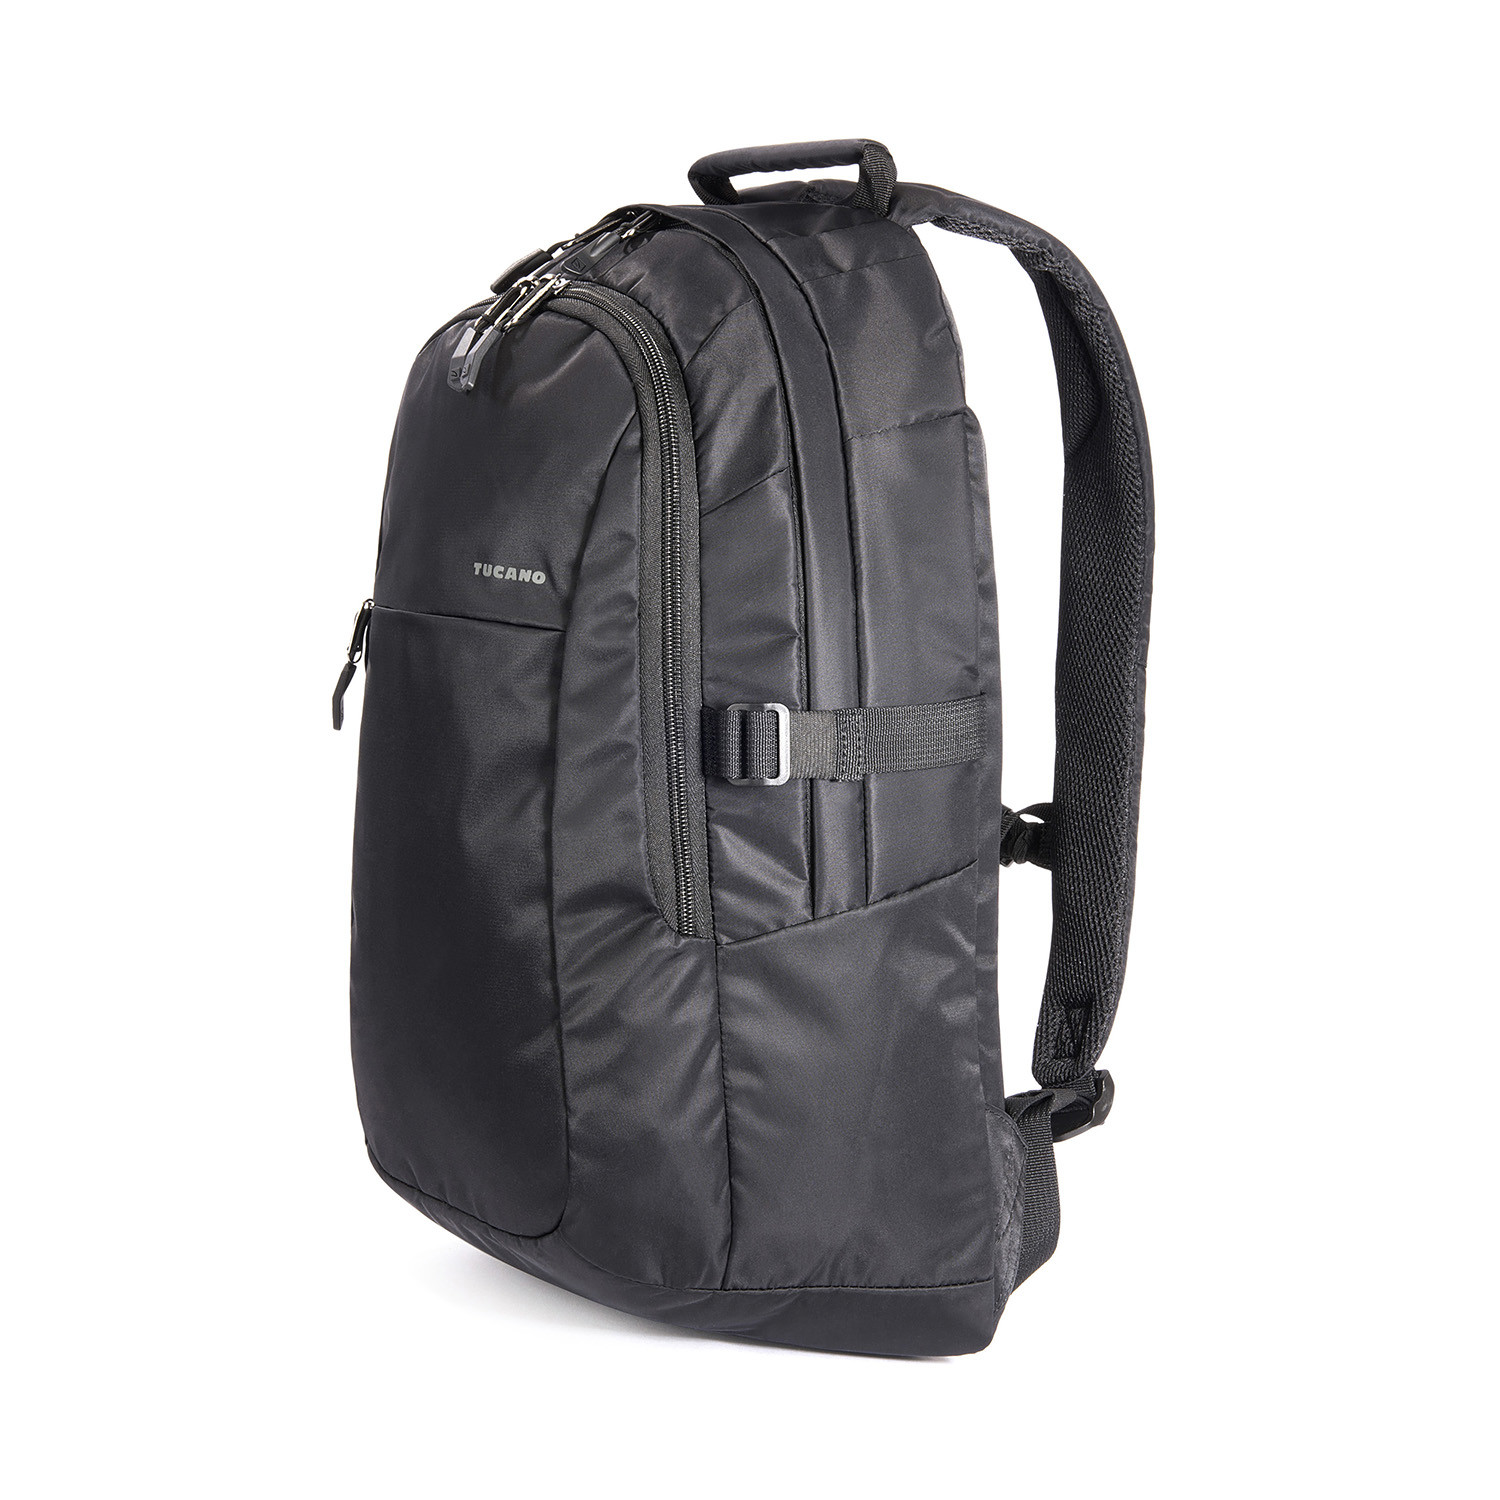 Livello Backpack // Black - Tucano - Touch of Modern